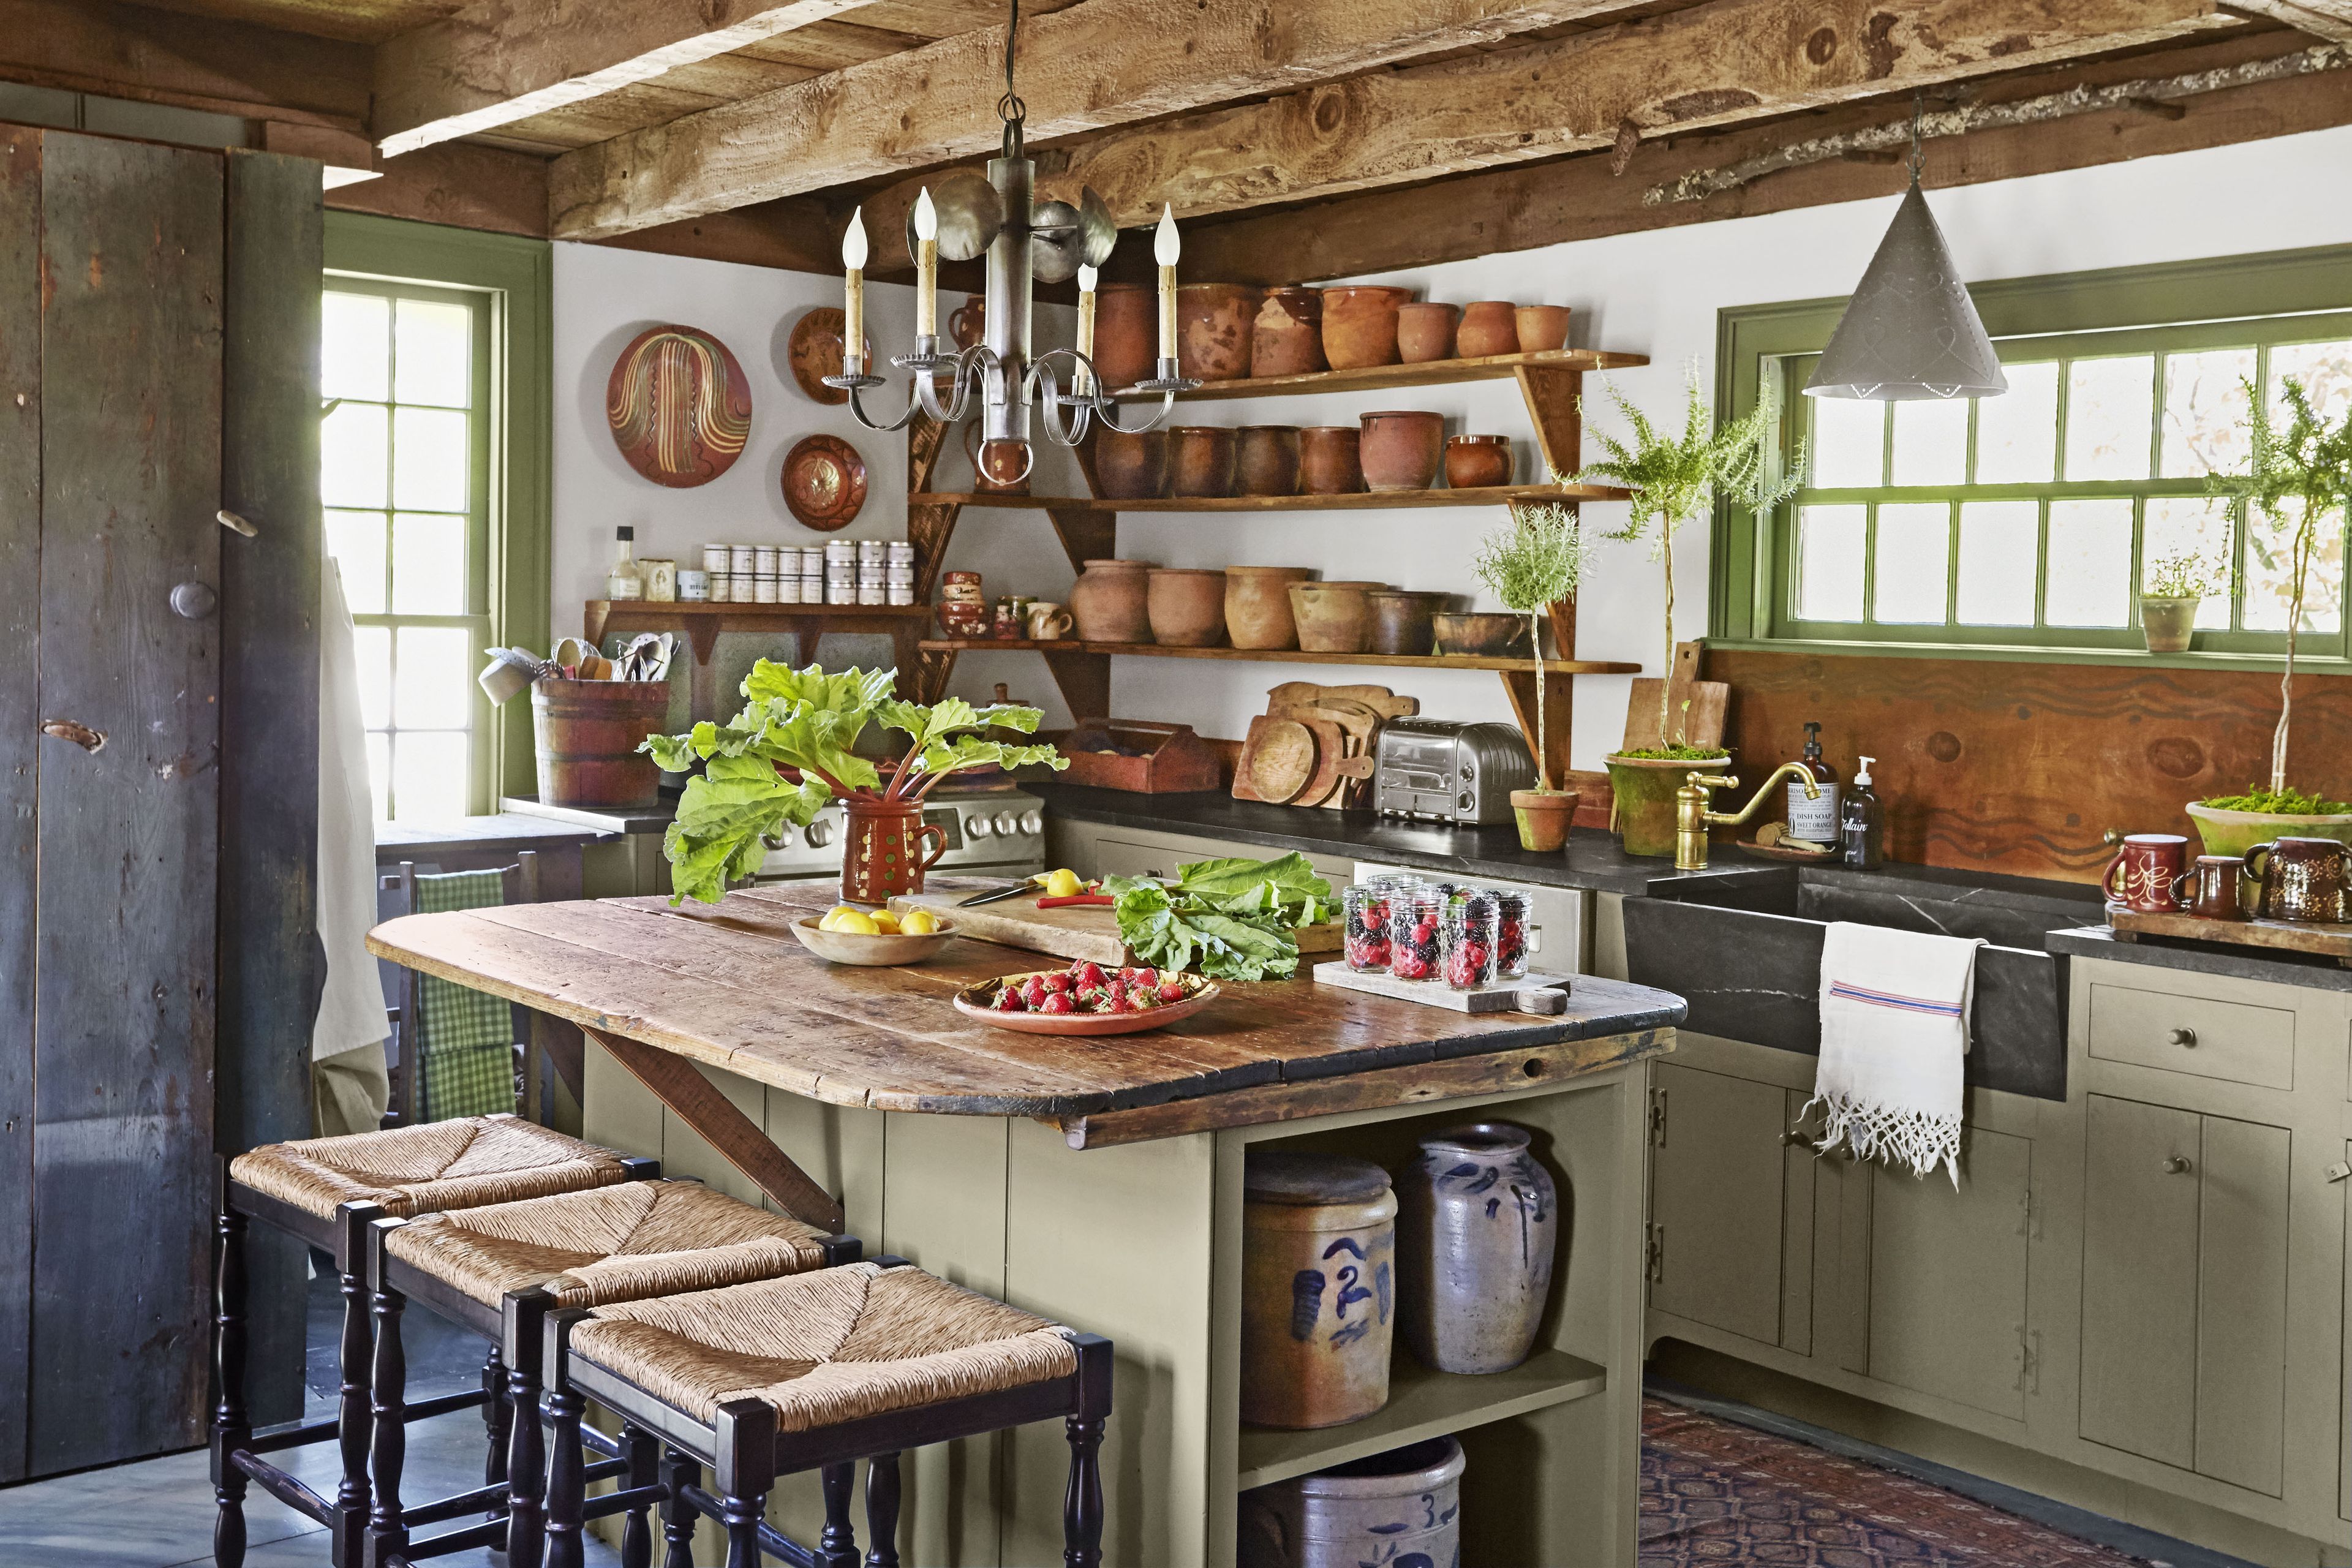 15 Farmhouse Kitchen Decor Ideas For A Cozy And Rustic Charm